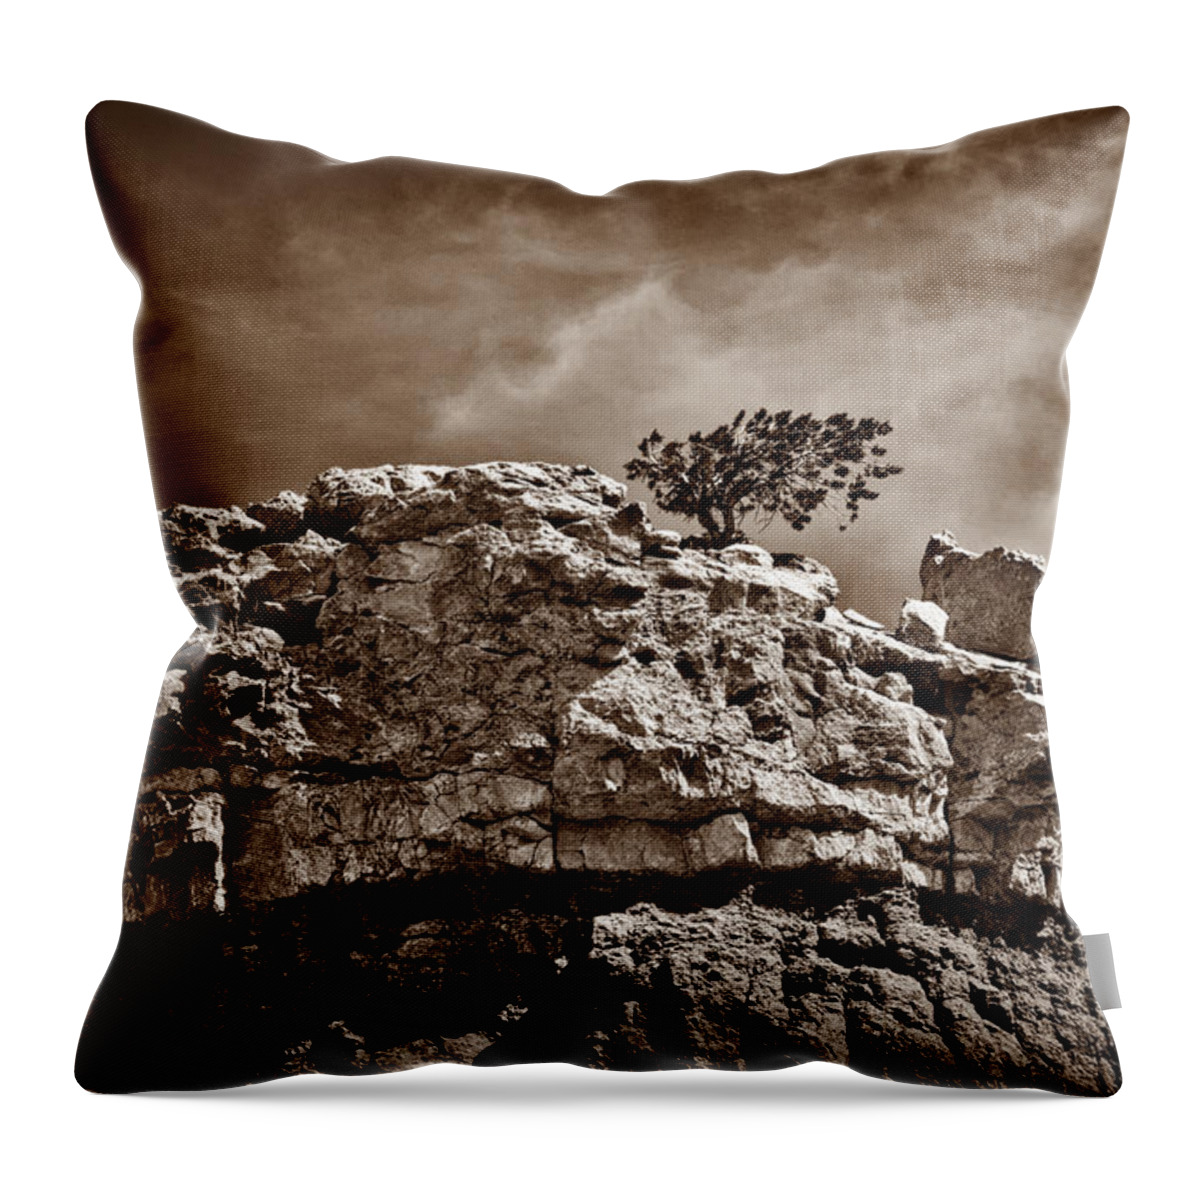 Monochrome Throw Pillow featuring the photograph Lofty Solitude - Sepia by Christopher Holmes